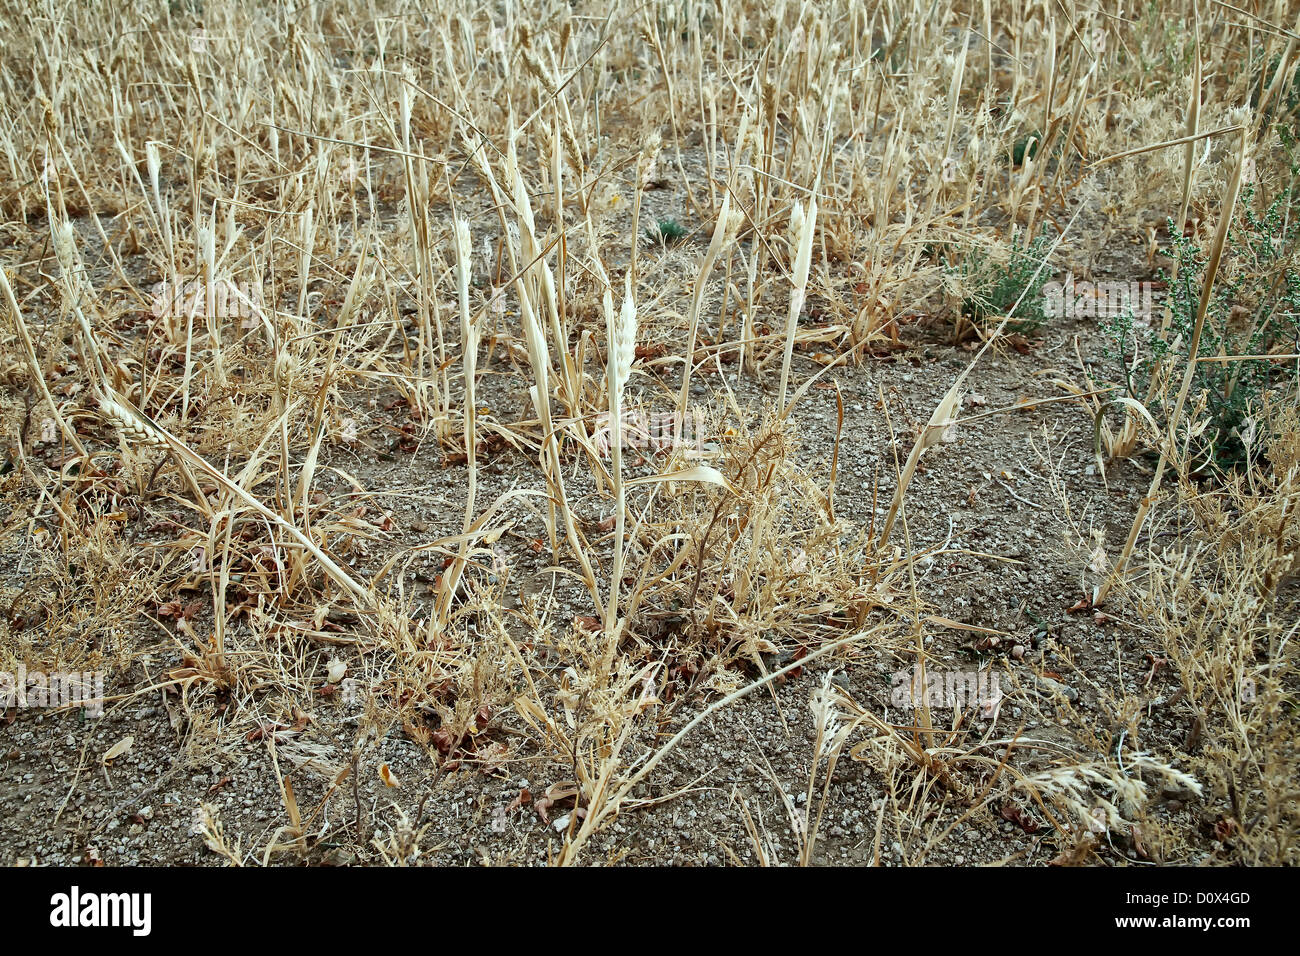 Wheat field, crop failure due to drought. Stock Photo